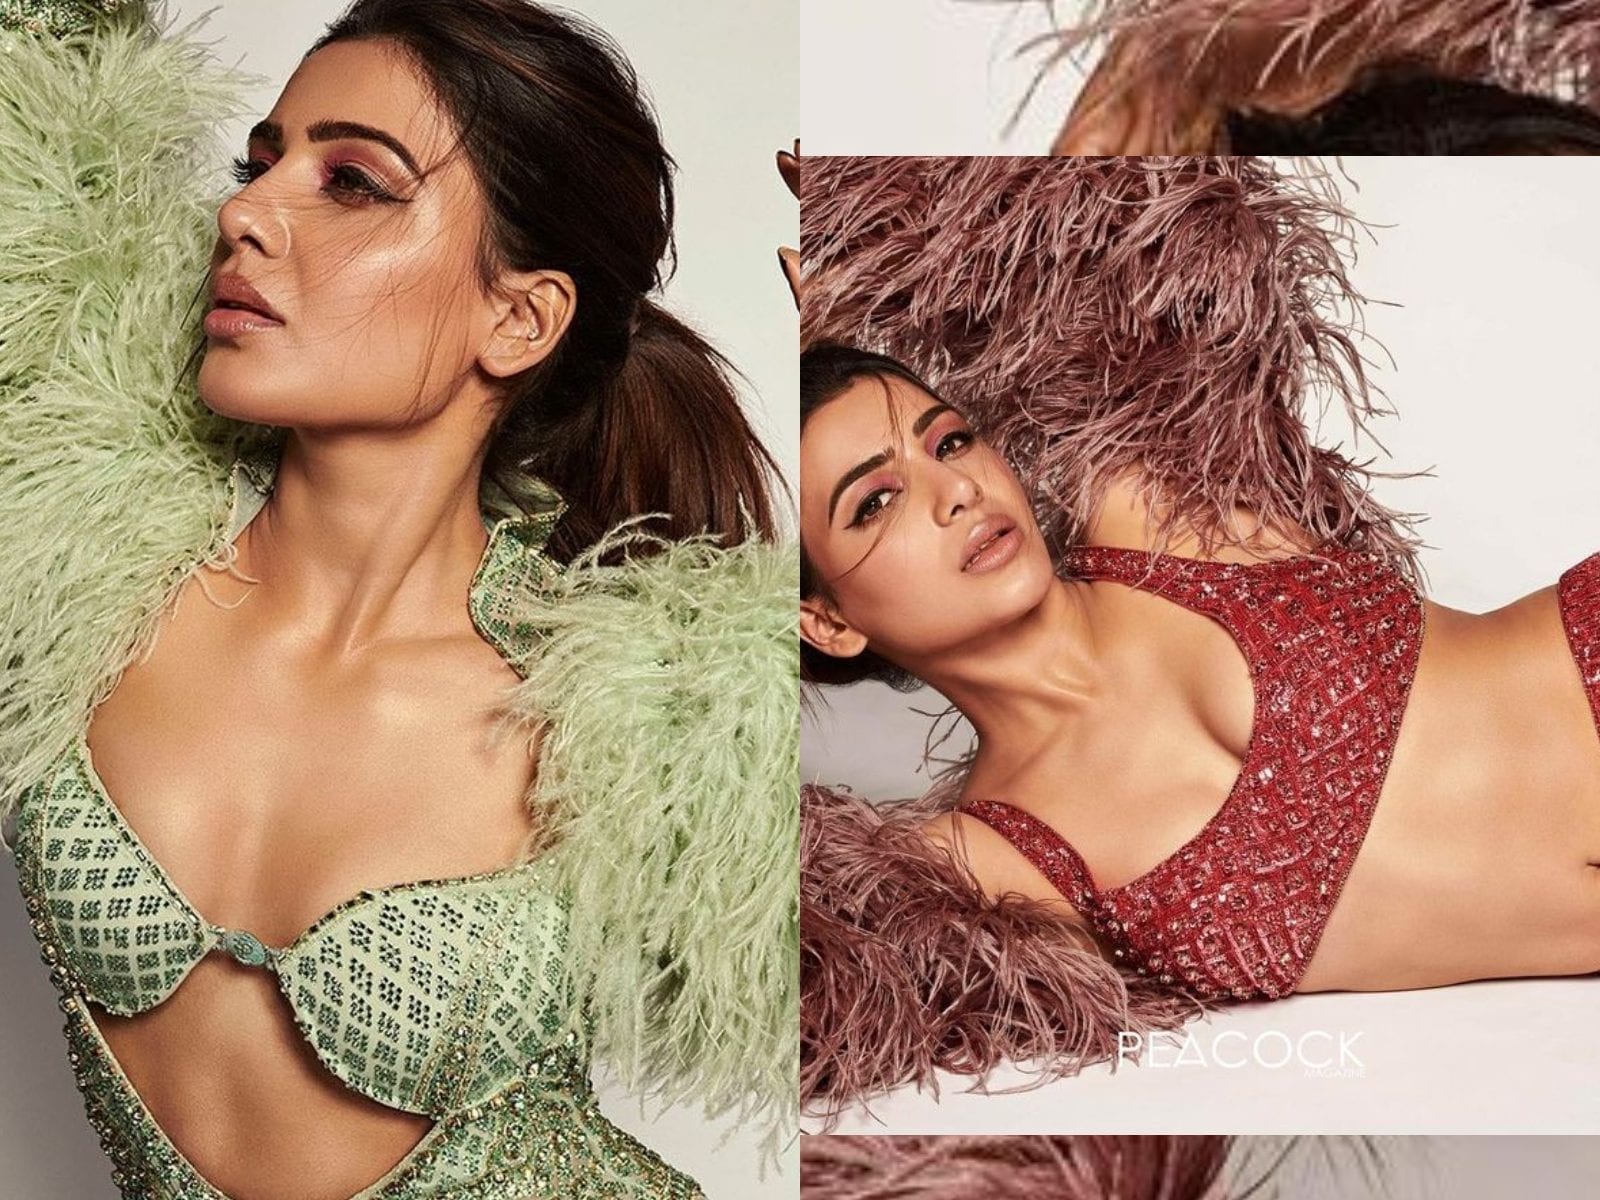 Tamil Actress Samantha Sex Photos - Samantha Burns Up the Instagram With Her Hot Avatar, Displays Toned Midriff  in Bralette; See Pics - News18